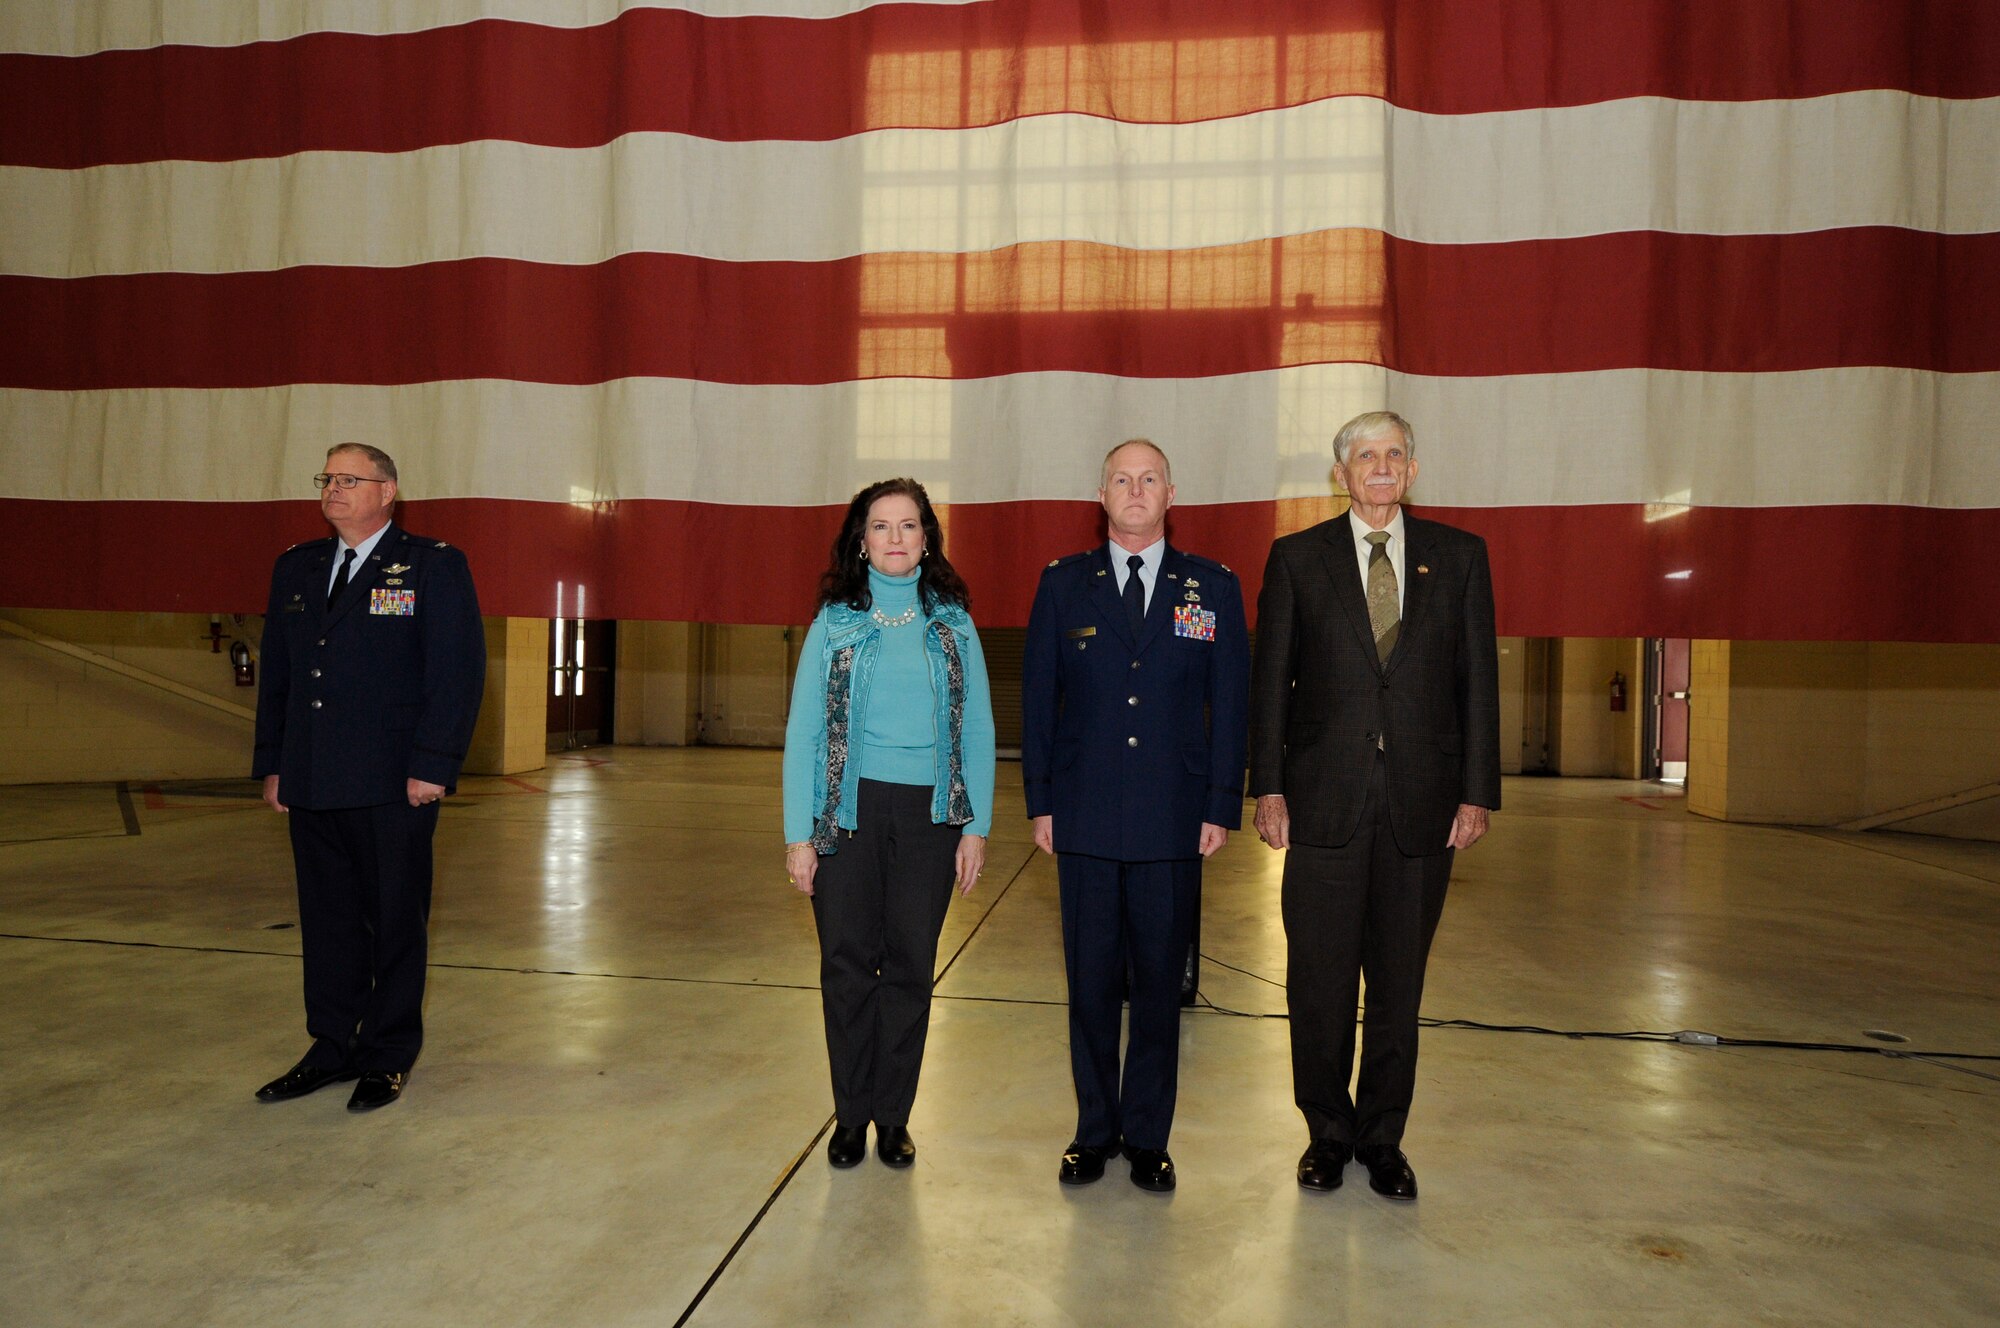 U.S. Air Force Lt. Col. Allan R. Cecil (center), deputy commander of the 145th Maintenance Group, his spouse, and retired Brig. Gen. Fisk Outwater, stand at attention during the reading of the promotion orders during a ceremony held in his honor at the North Carolina Air National Guard Base, Charlotte Douglas International Airport, Jan. 9, 2016. (U.S. Air National Guard photo by Staff Sgt. Julianne M. Showalter /Released)